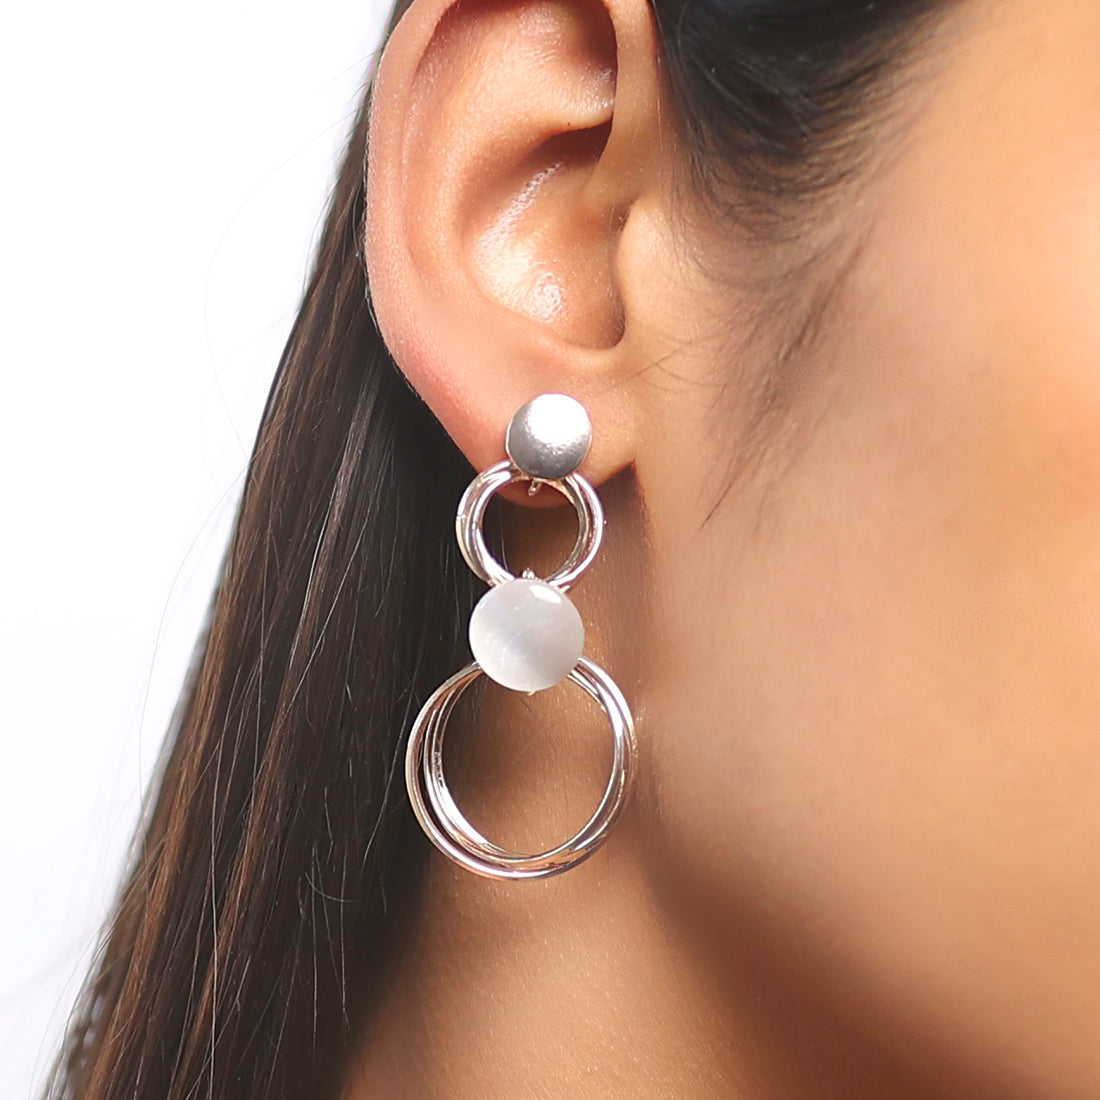 Circular Layered White Moonstone Studded Rose Gold-Toned Drop Earrings